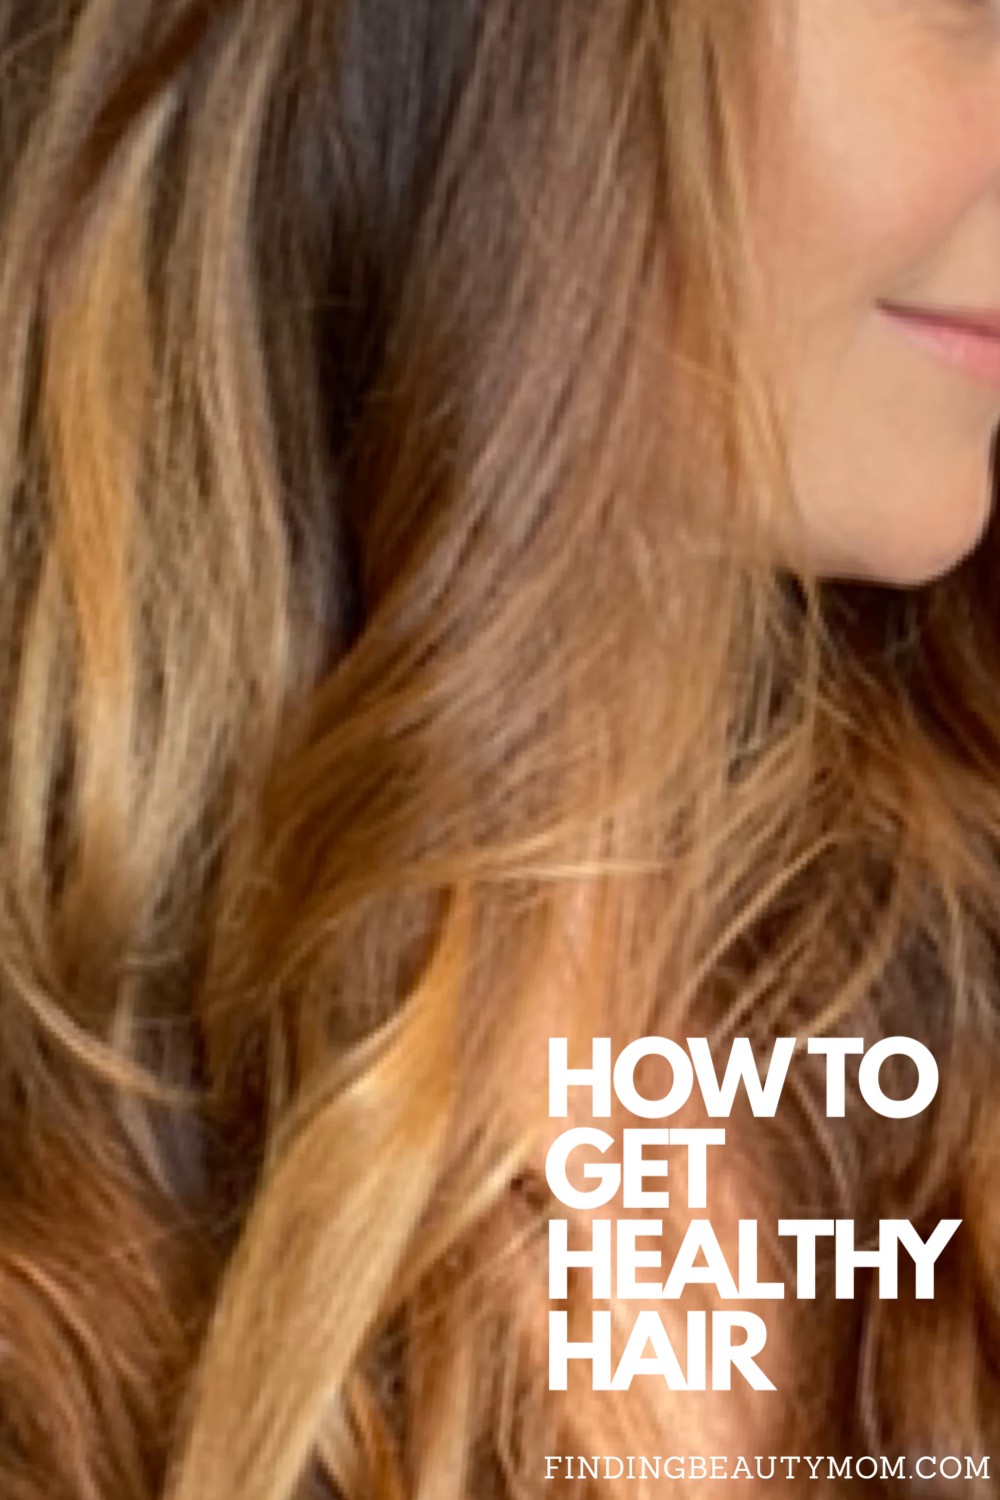 Natural hair care tips, how to get healthy hair naturally, taking care of balayage hair, finding beauty mom wellness tips, foods to eat for hair growth